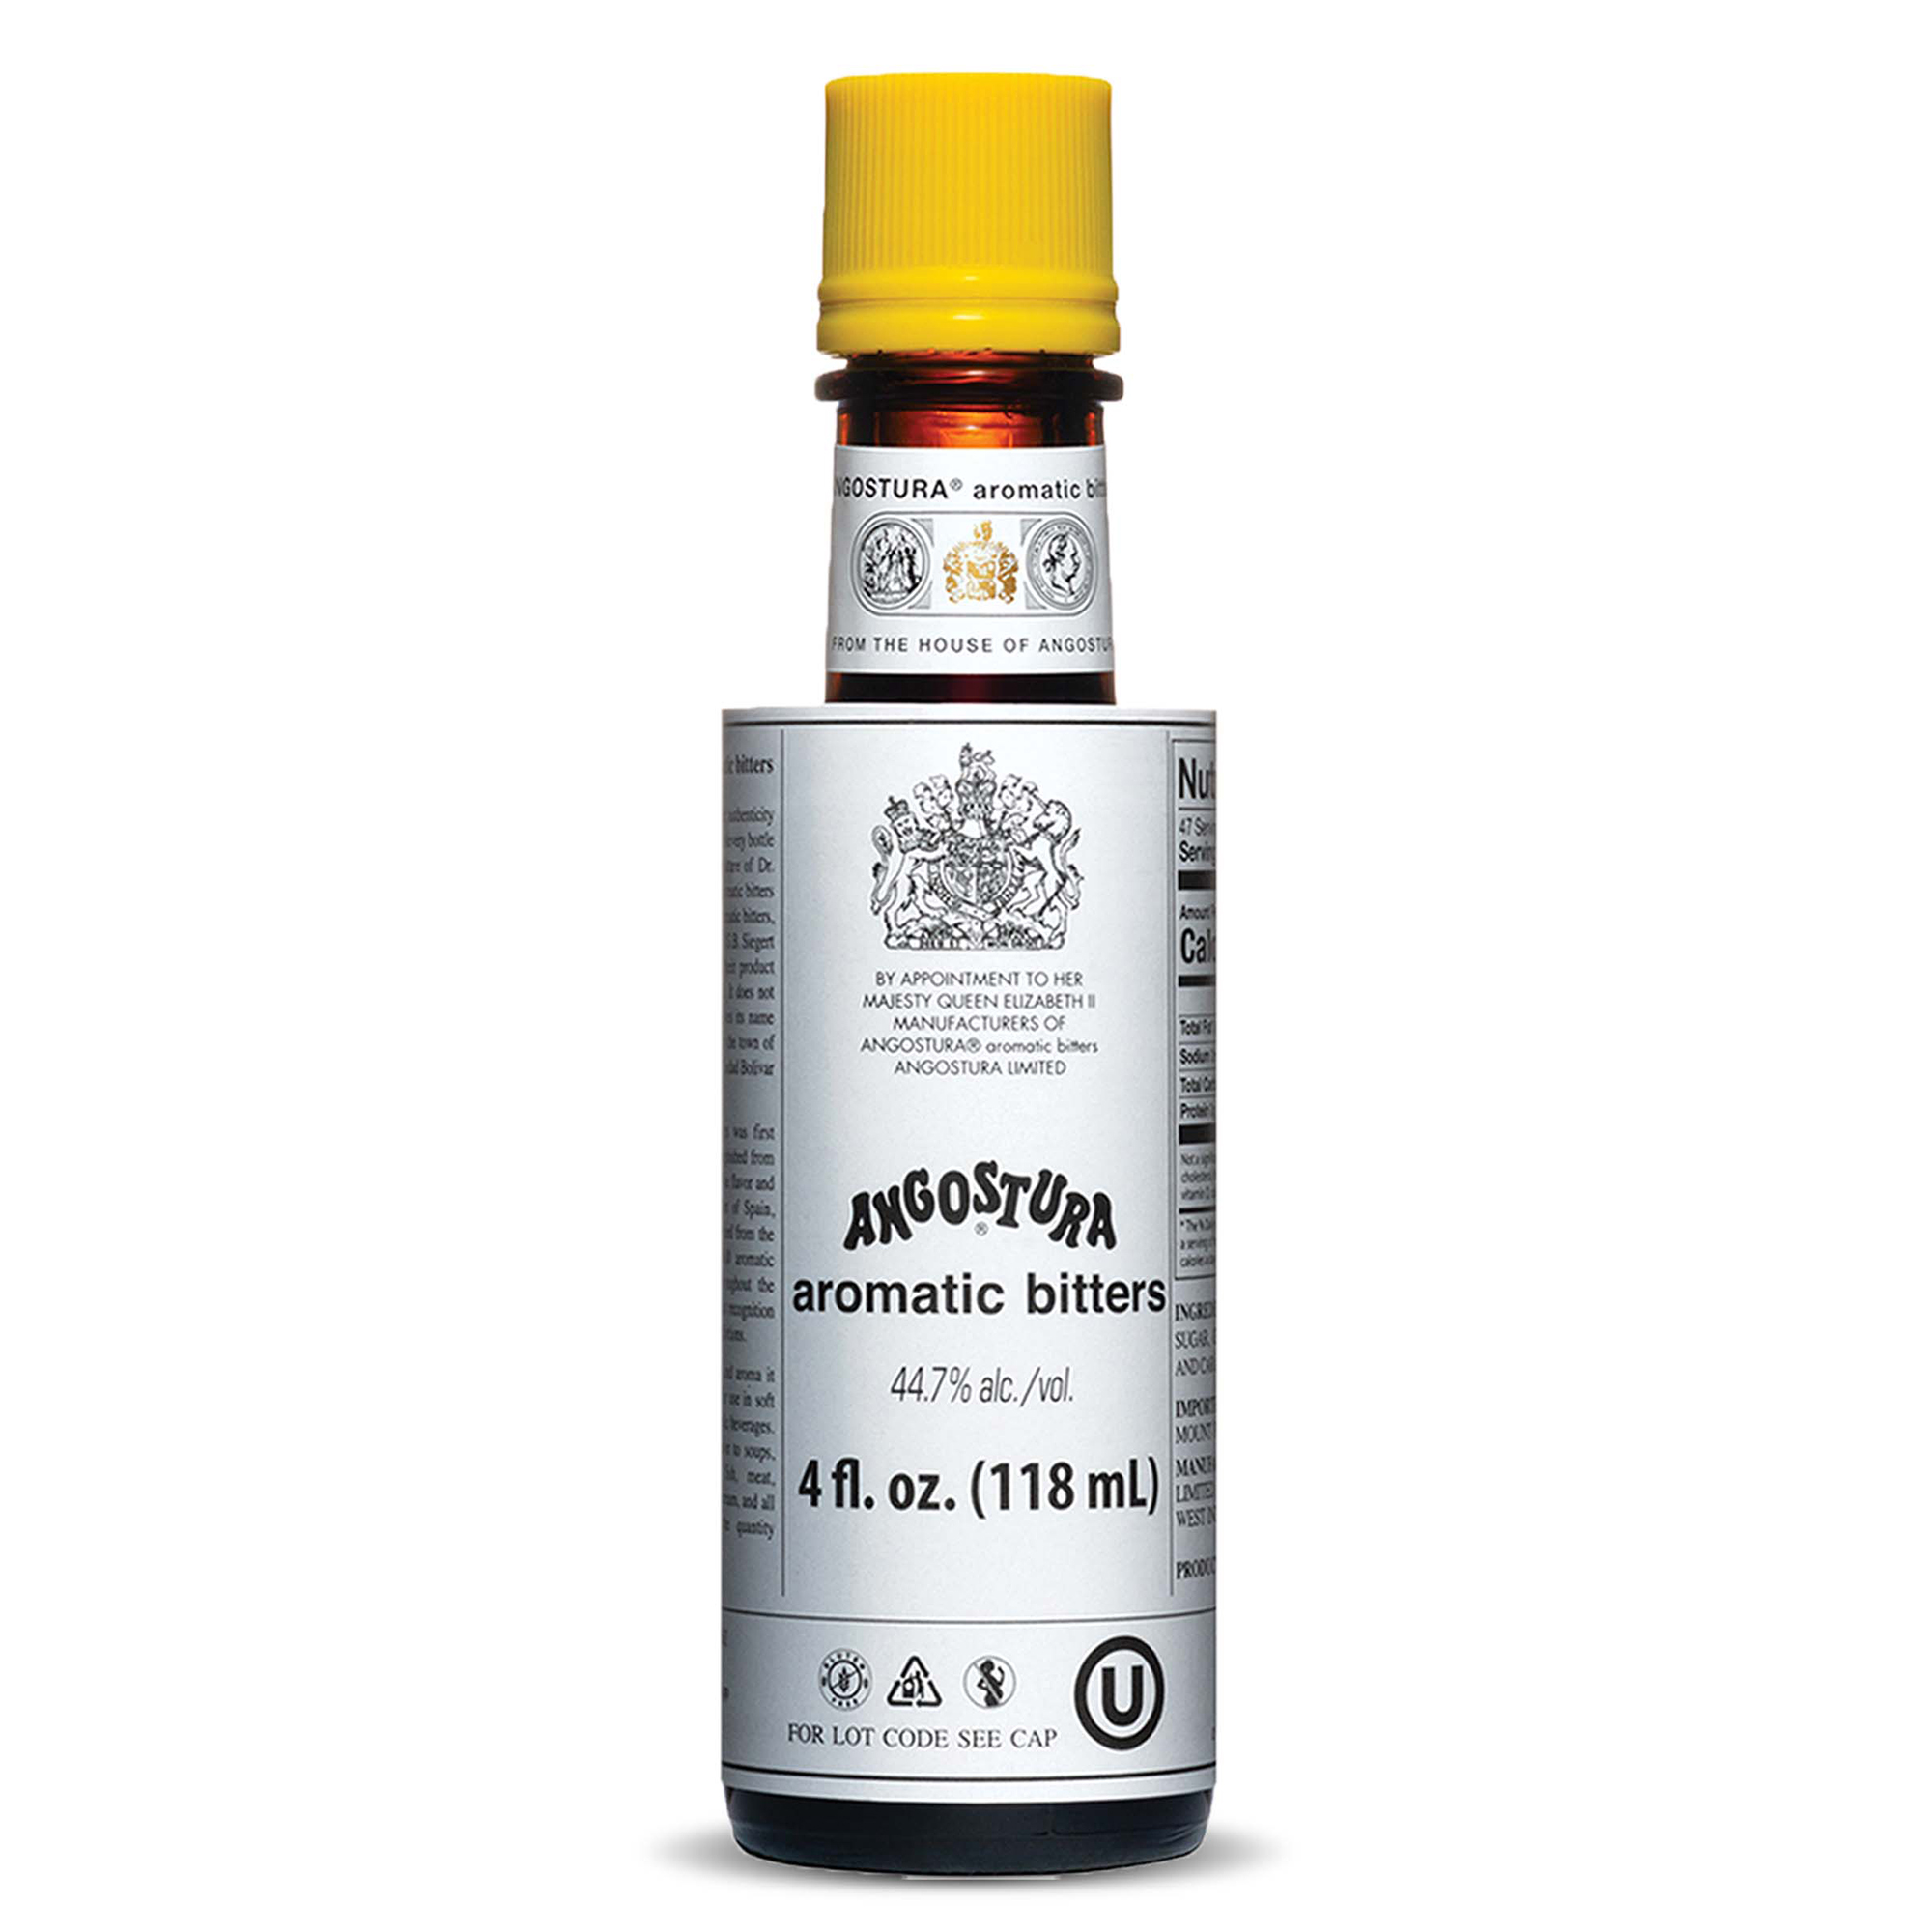 ANGOSTURA Aromatic Bitters, Cocktail Bitters for Professional & Home Mixologists, 4 fl oz - image 1 of 11